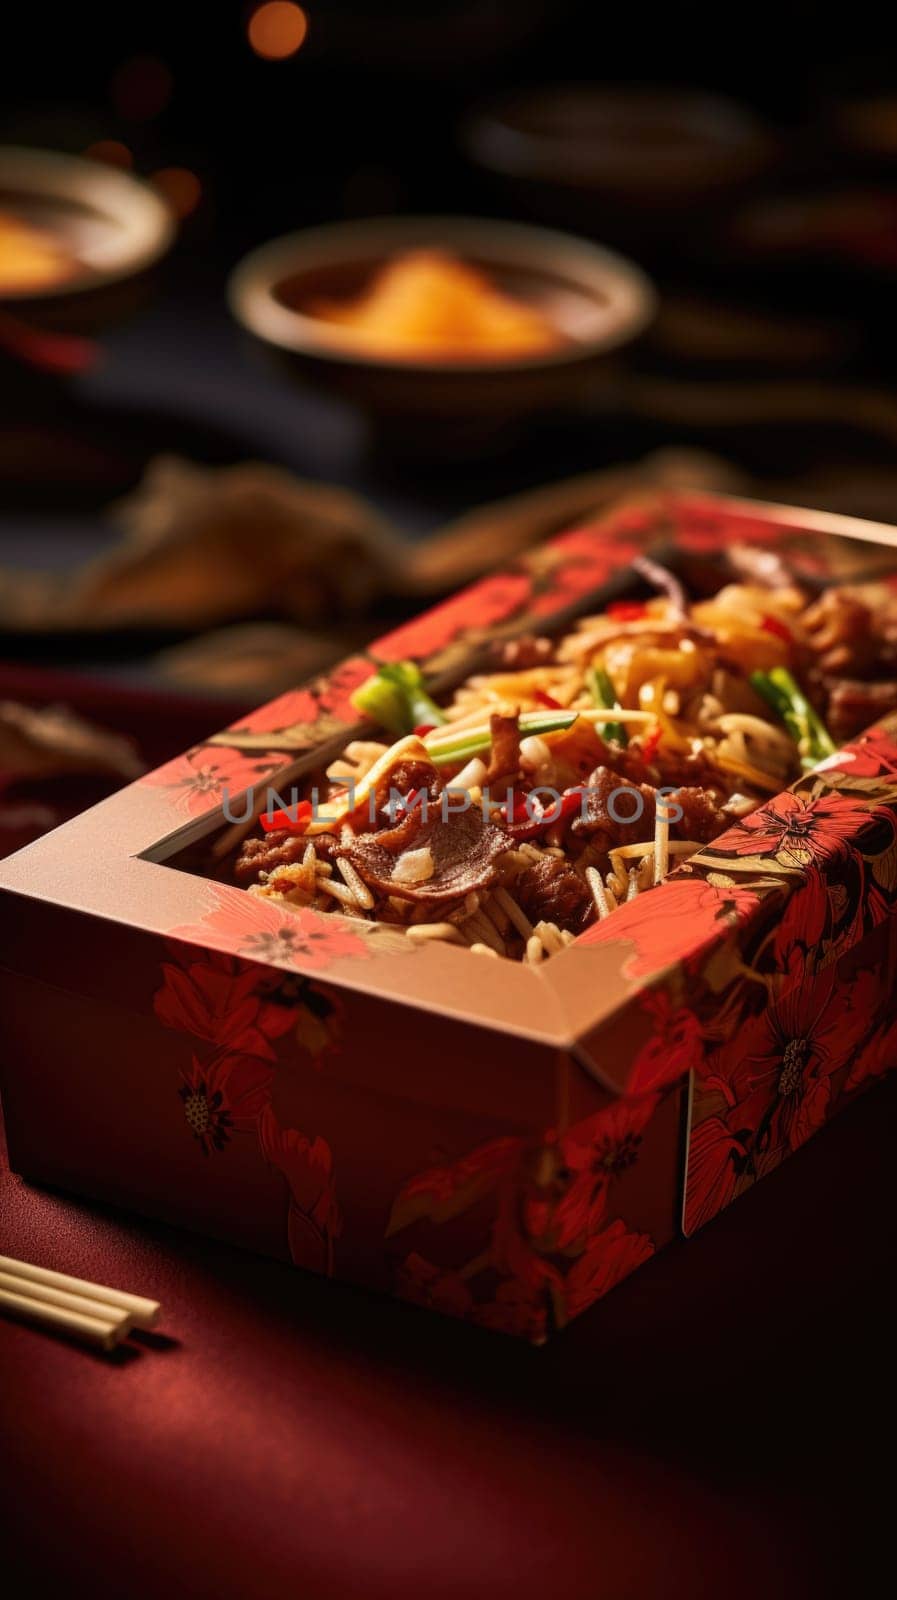 A box of food sitting on a table with chopsticks